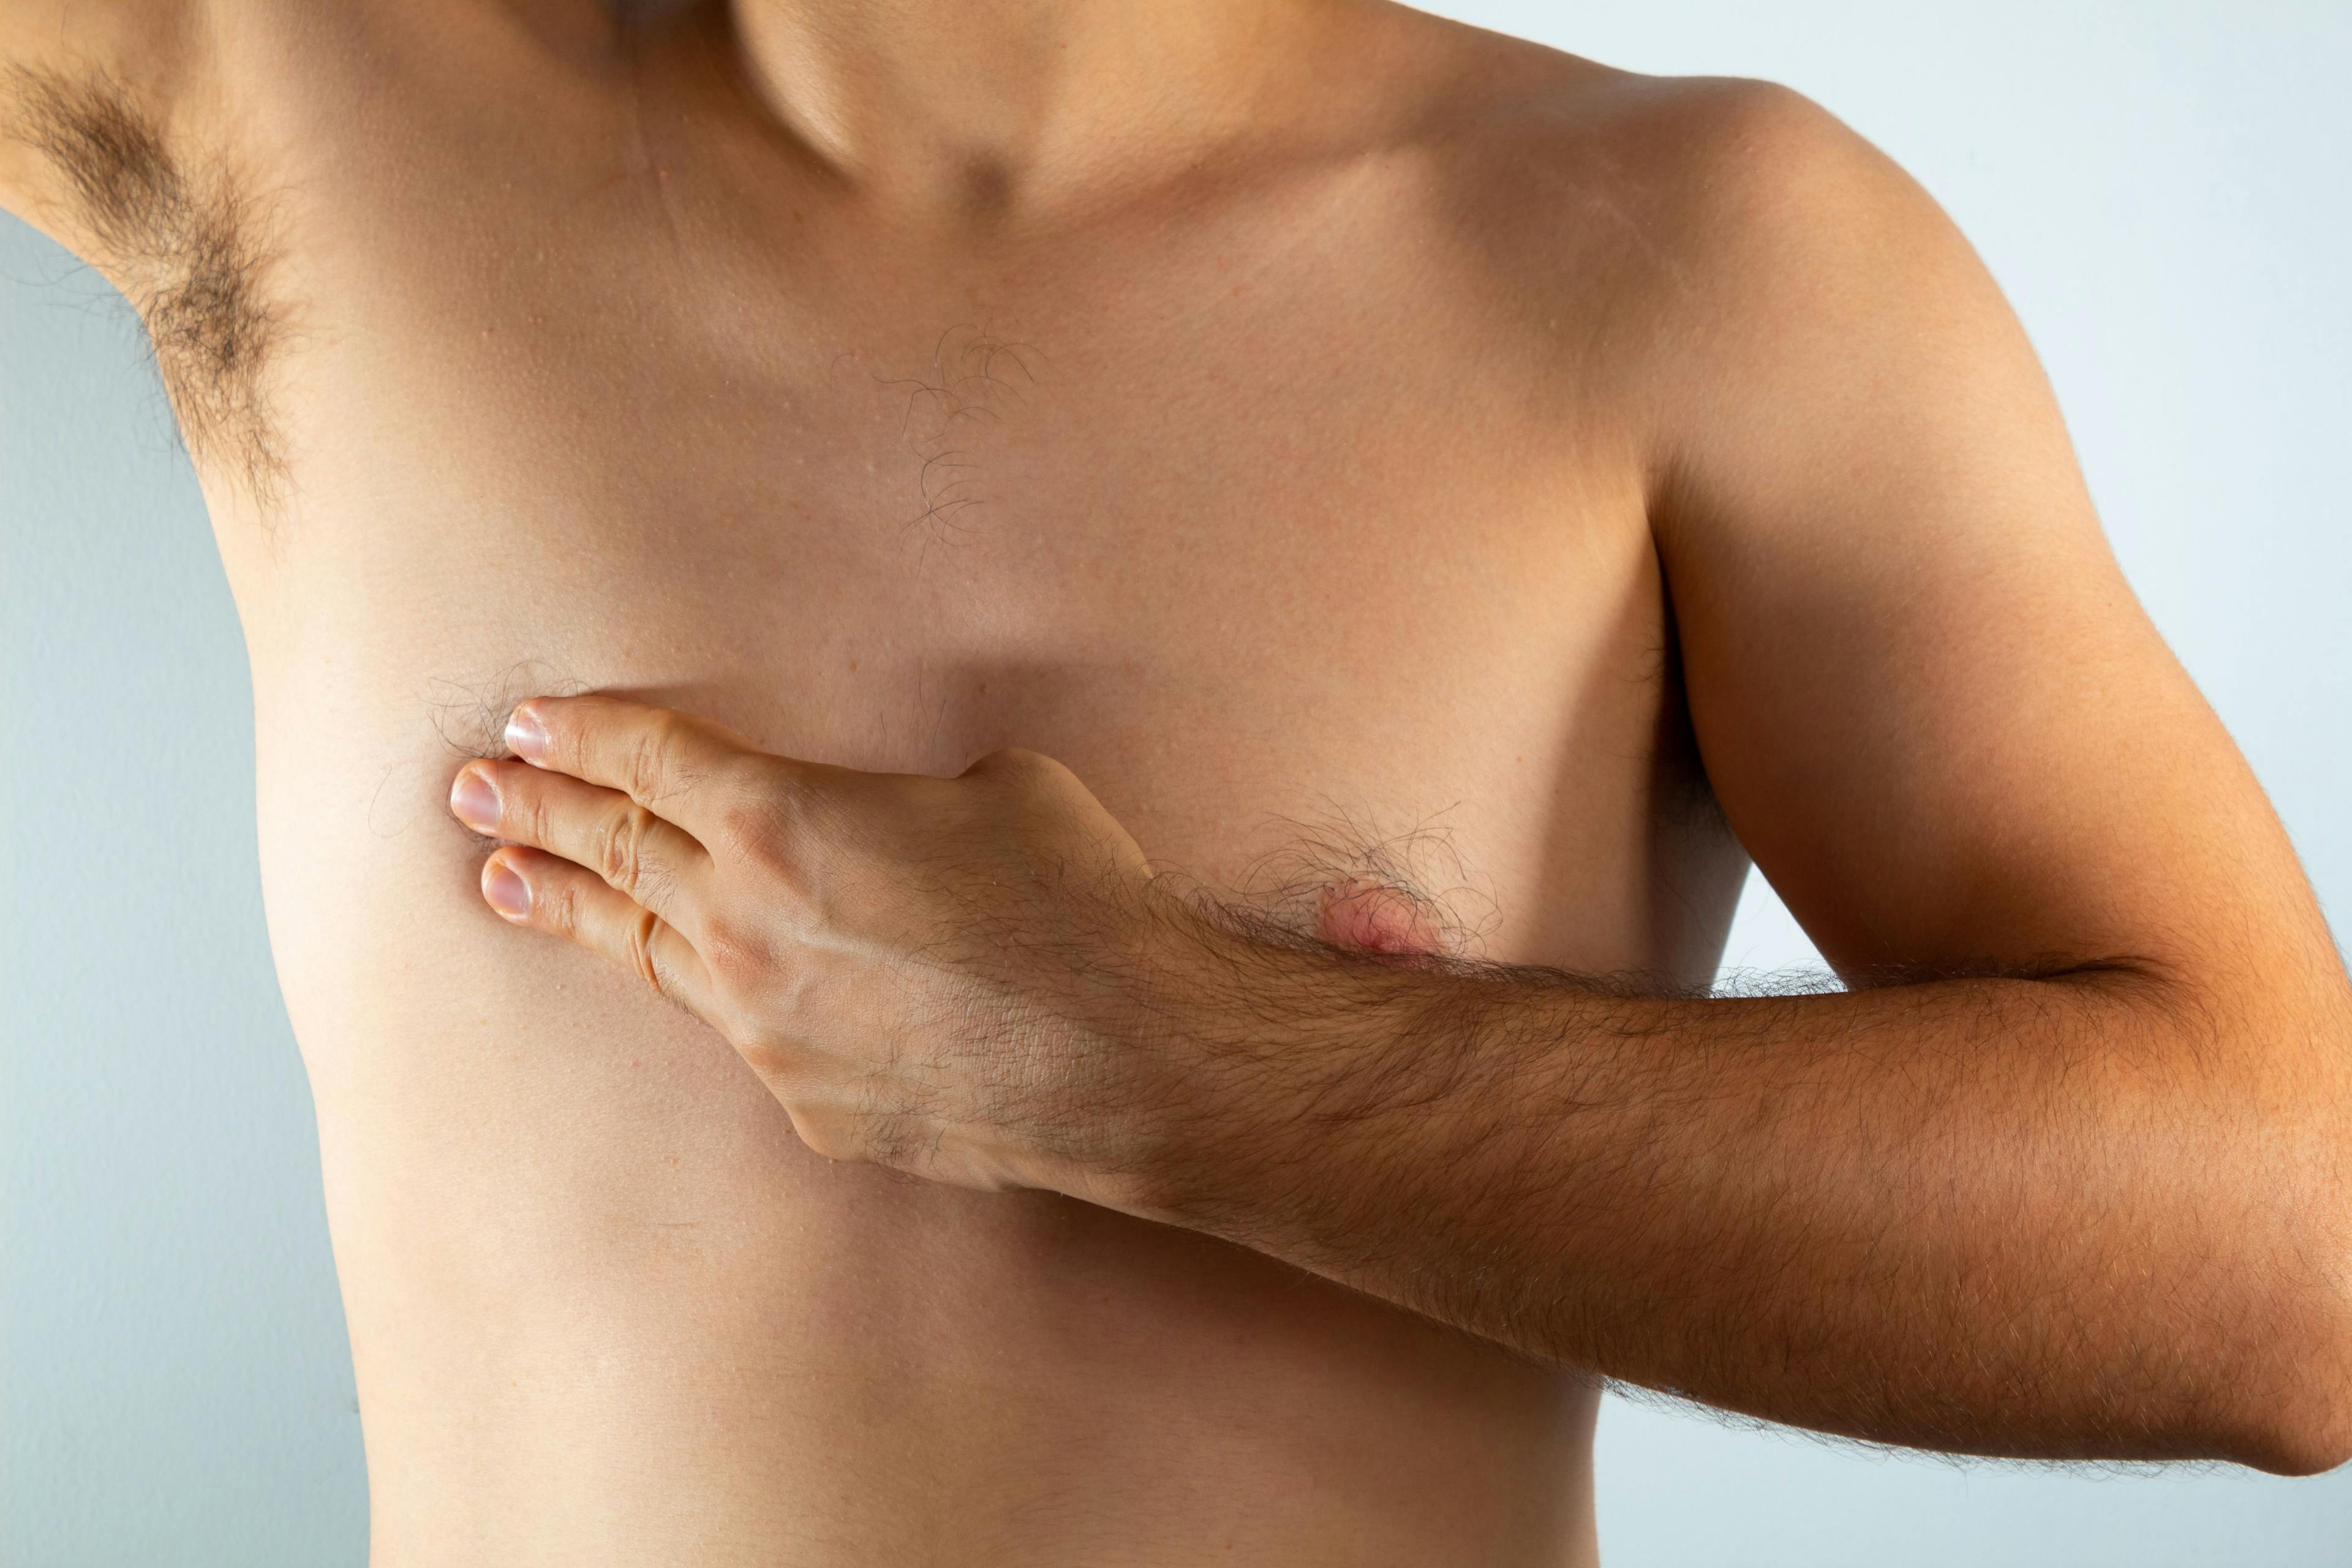 close up of a man's chest looking for signs of male breast cancer | Image credit: © Antonio Tanaka - © stock.adobe.com